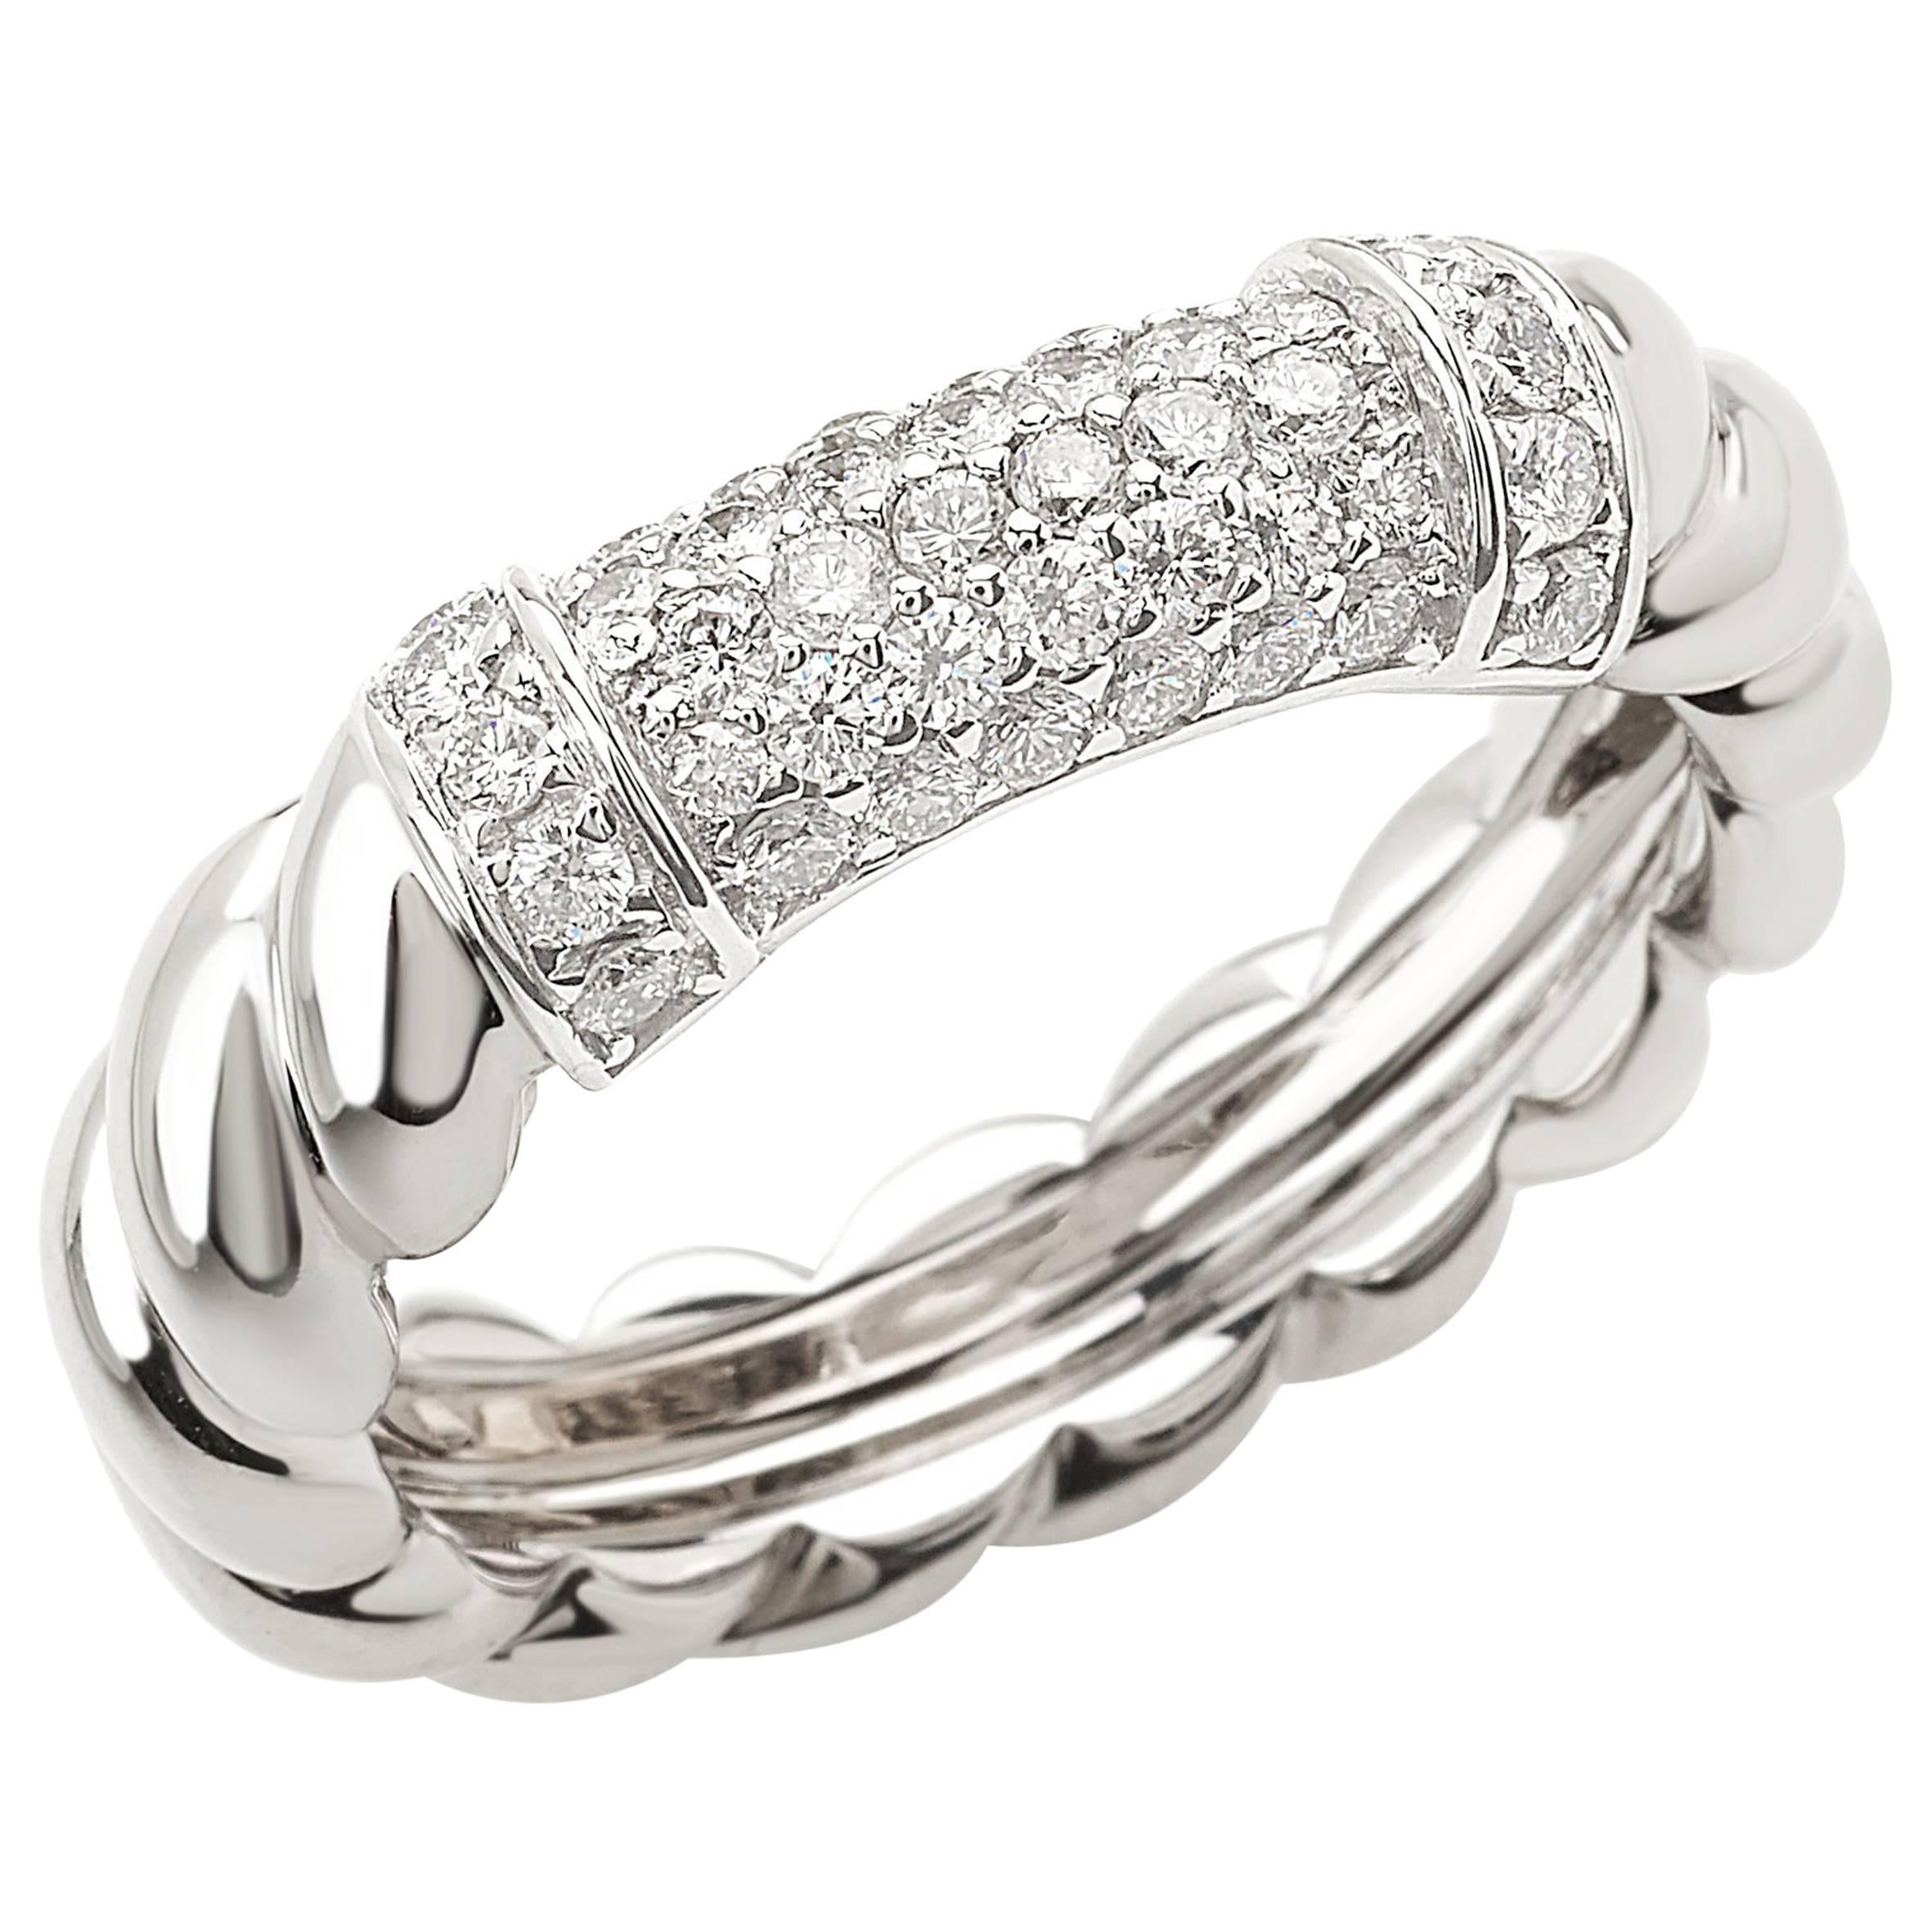 Ring from the Collection "Rope" 18 Karat White Gold and Diamonds For Sale